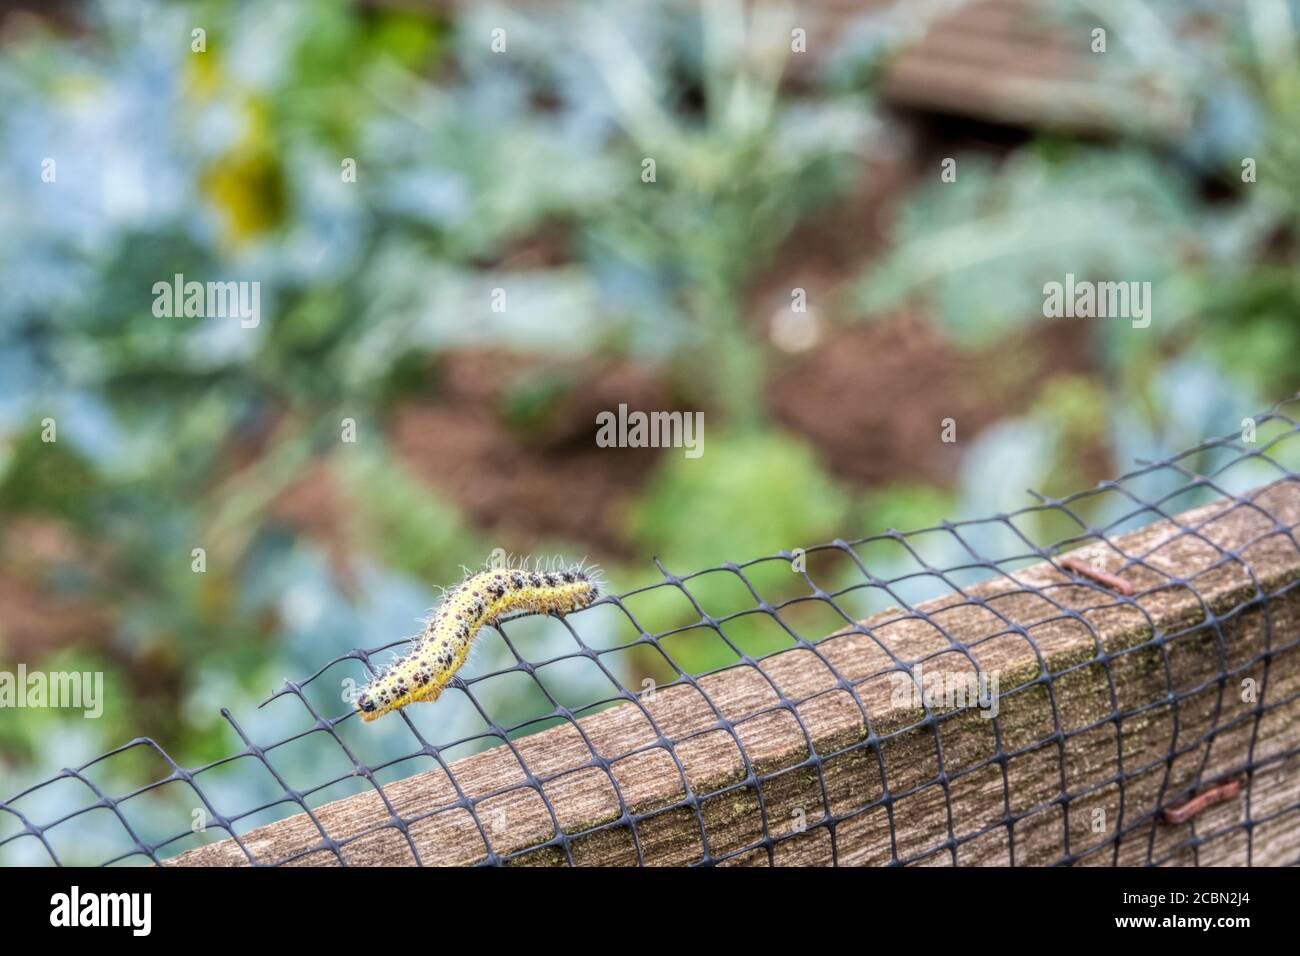 Caterpillar of the large white butterfly, Pieris brassicae, on fence around cabbage plants in a garden or allotment. Stock Photo